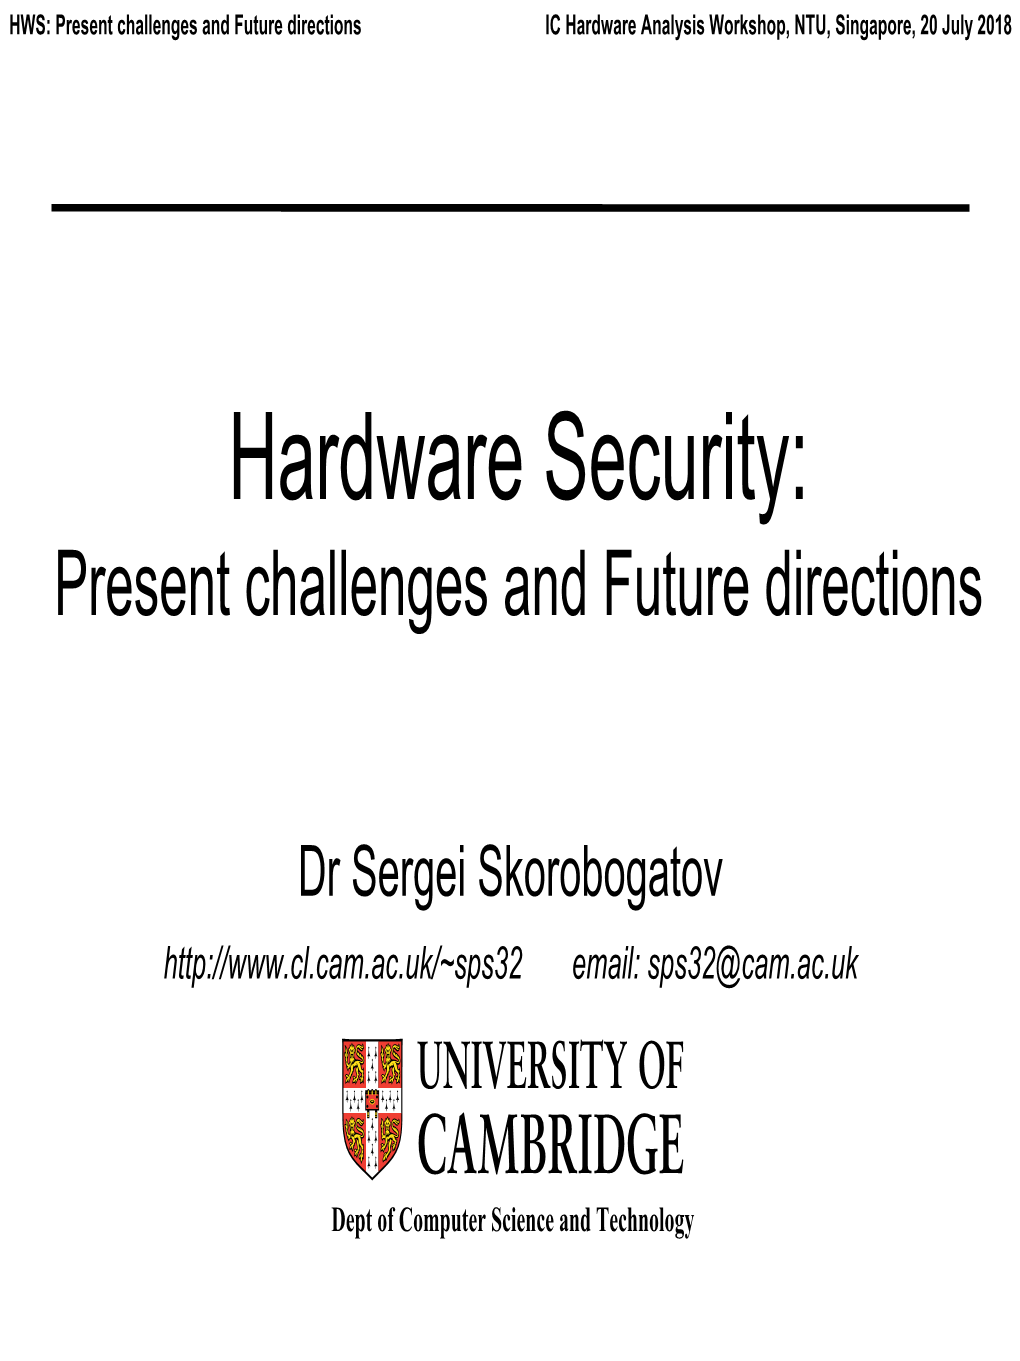 Hardware Security: Present Challenges and Future Directions